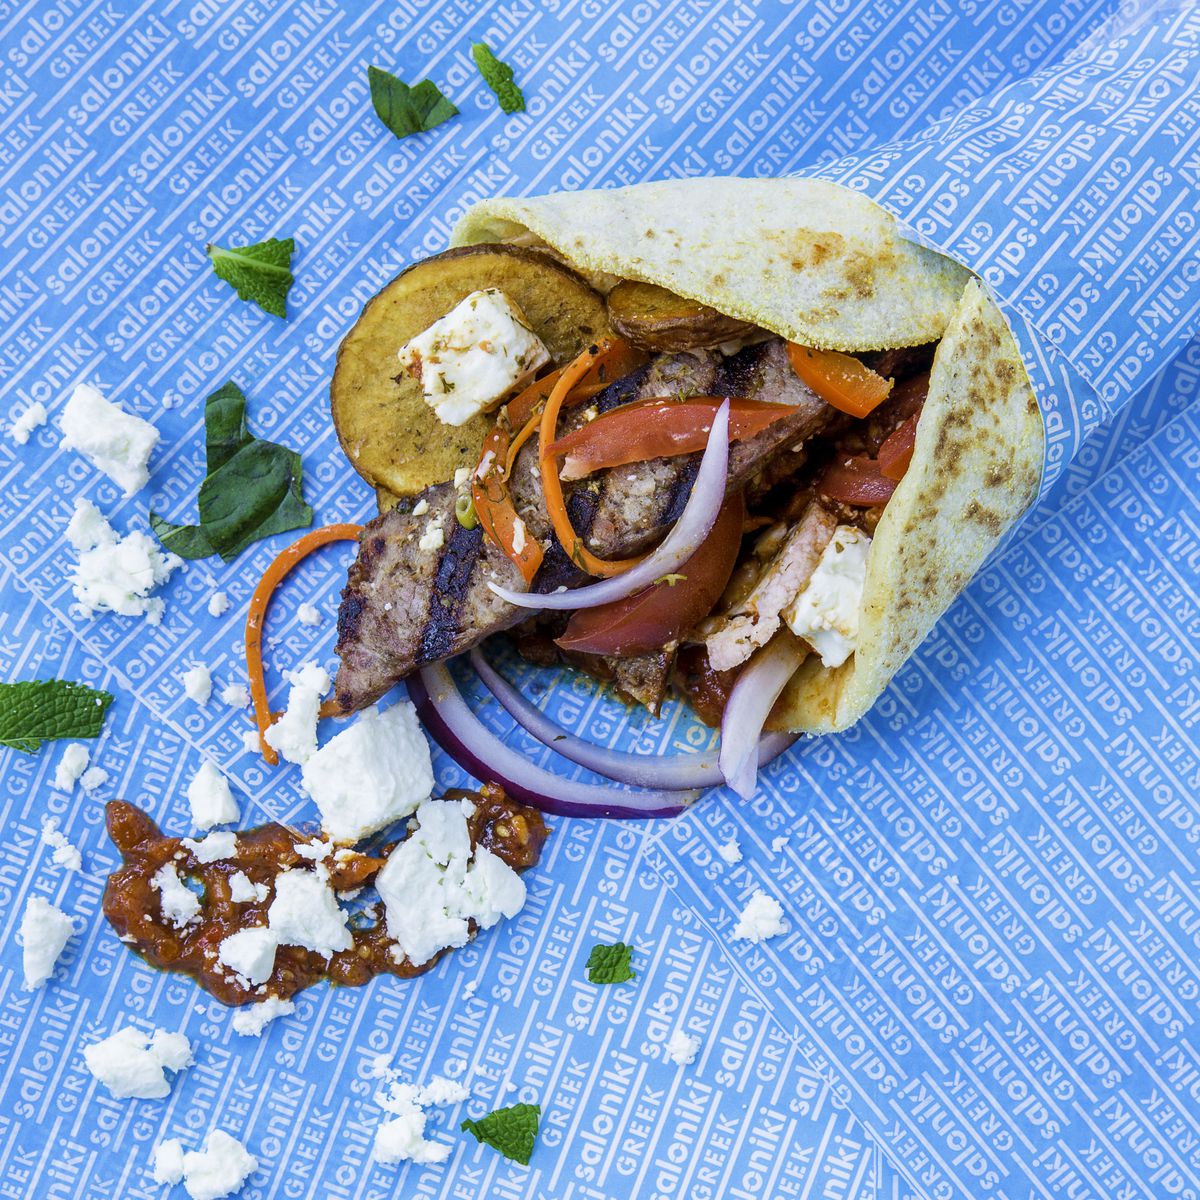 A pita sandwich filled with vegetables, chicken, and feta